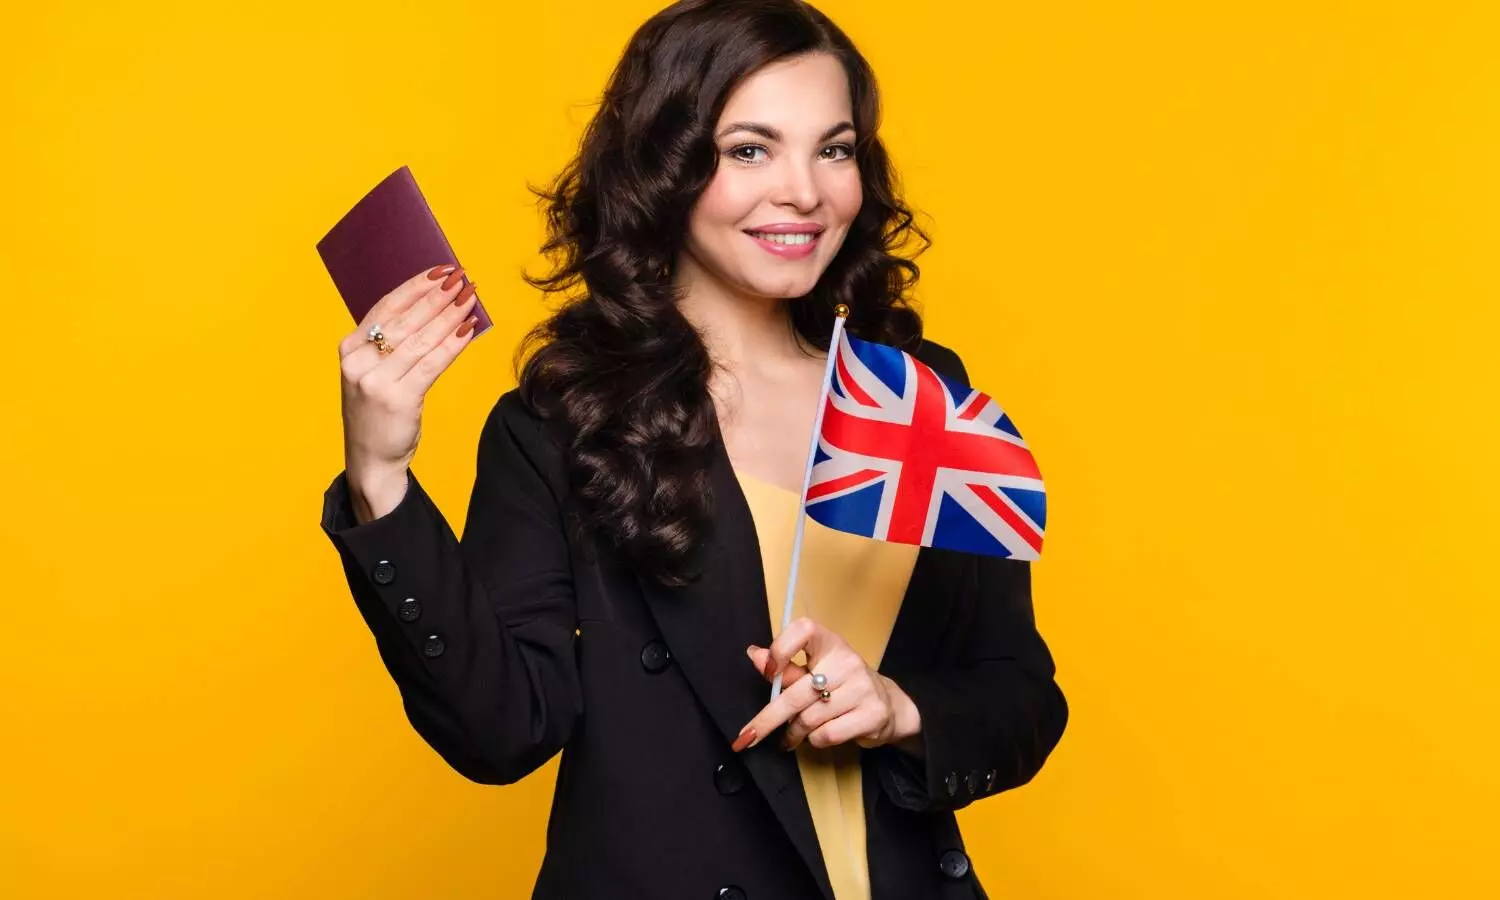 student with uk flag and passport